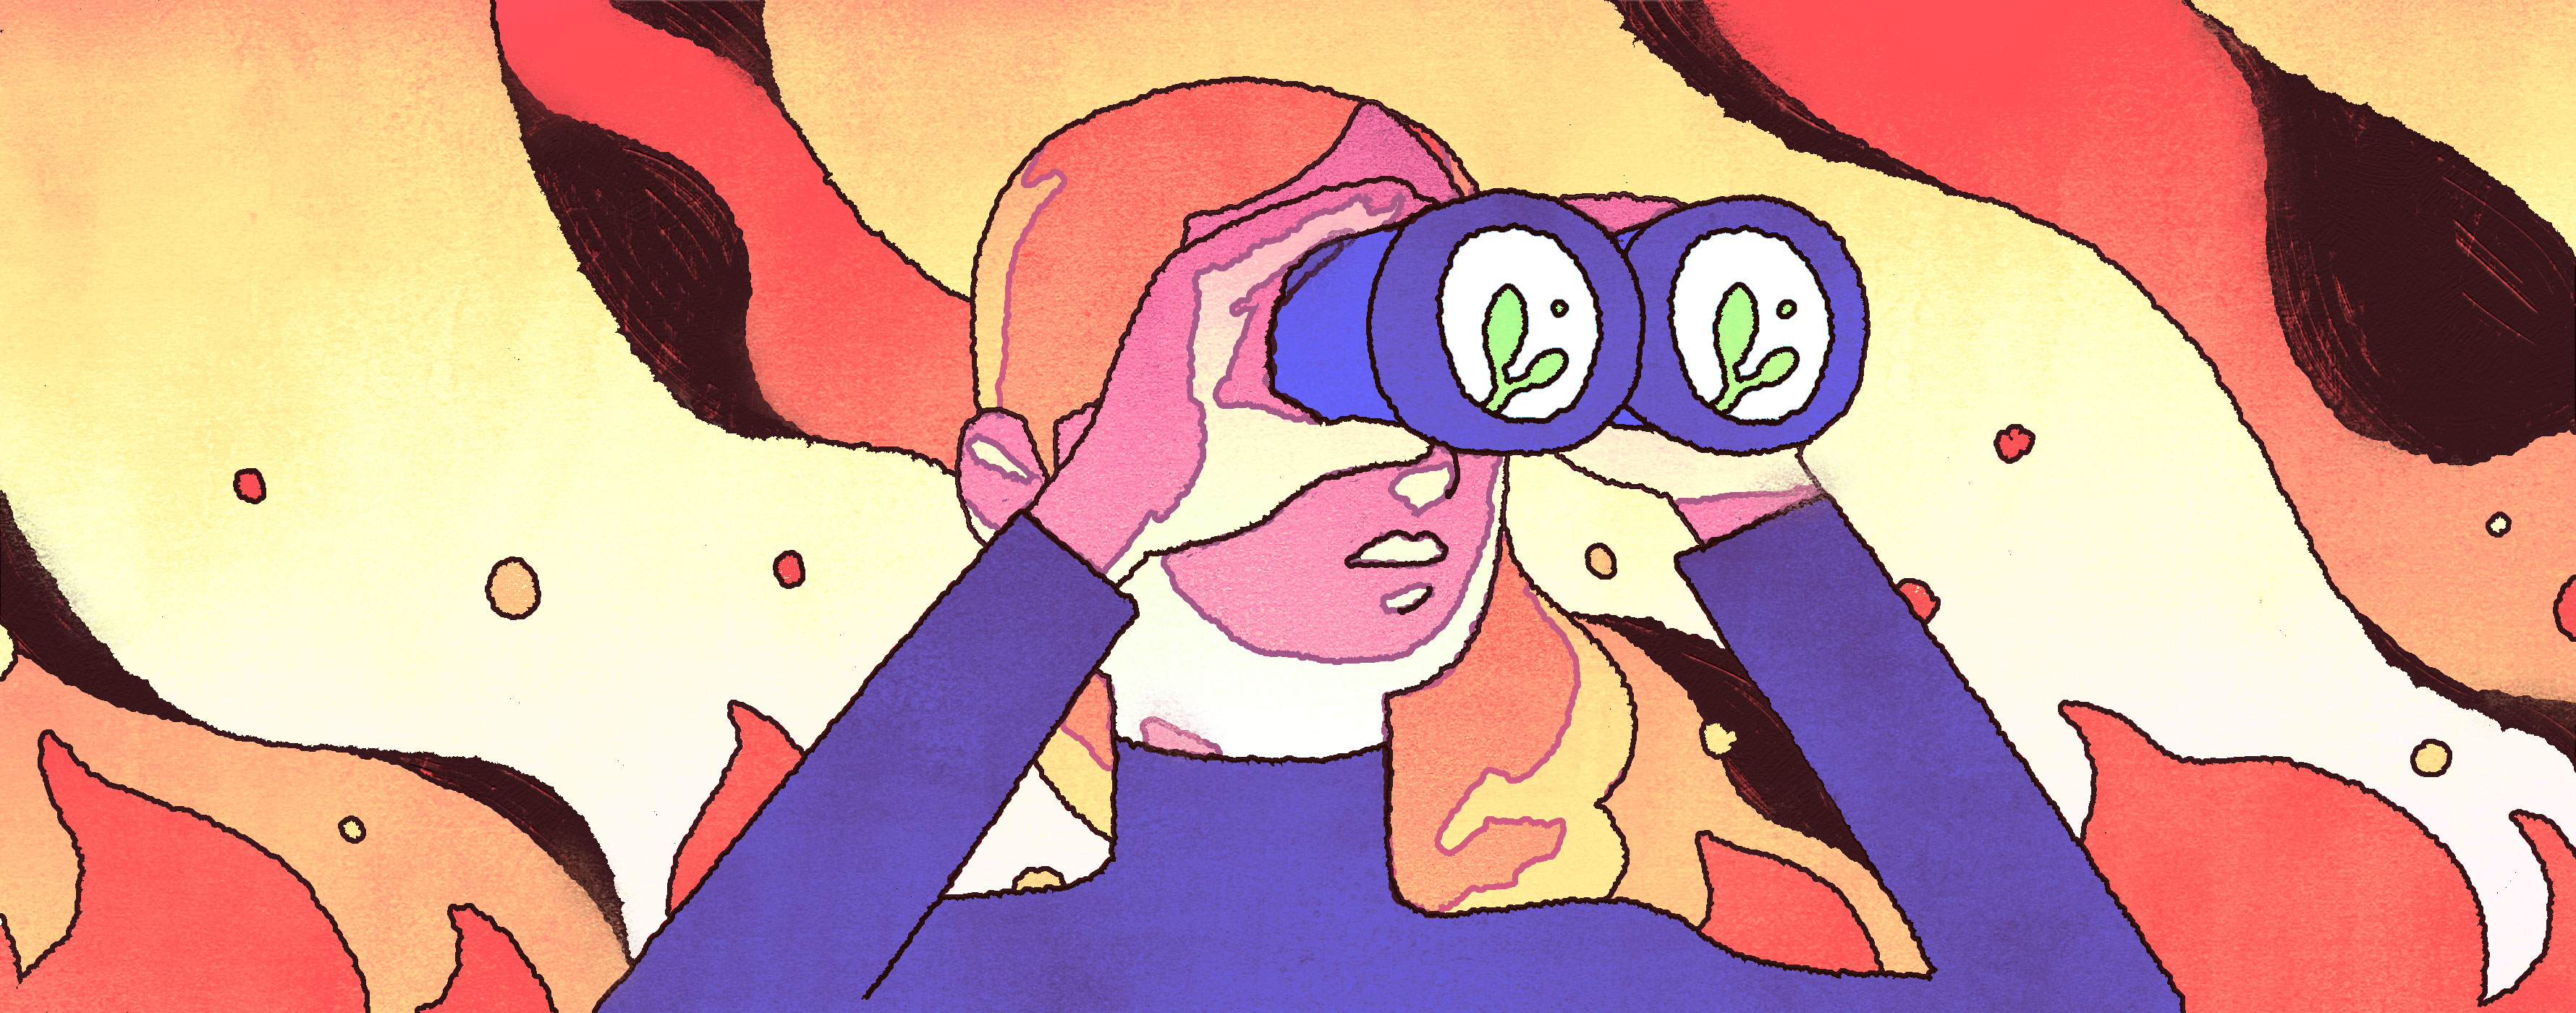 stylized graphic of a girl looking through binoculars surrounded by fire